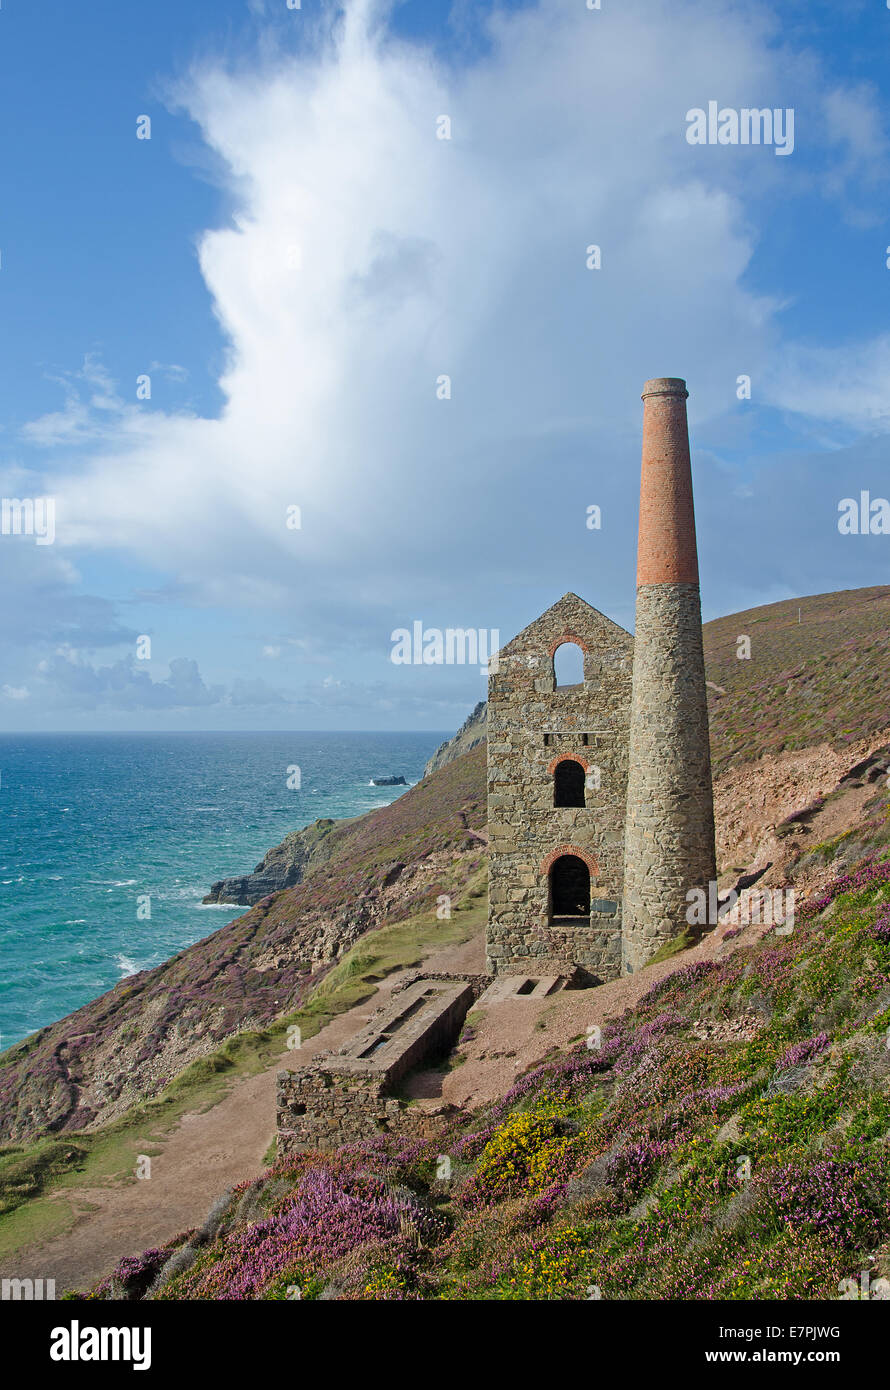 Towanroath Pumping Engine House at Wheal Coates between St Agnes and Porthtowan in North Cornwall. Stock Photo